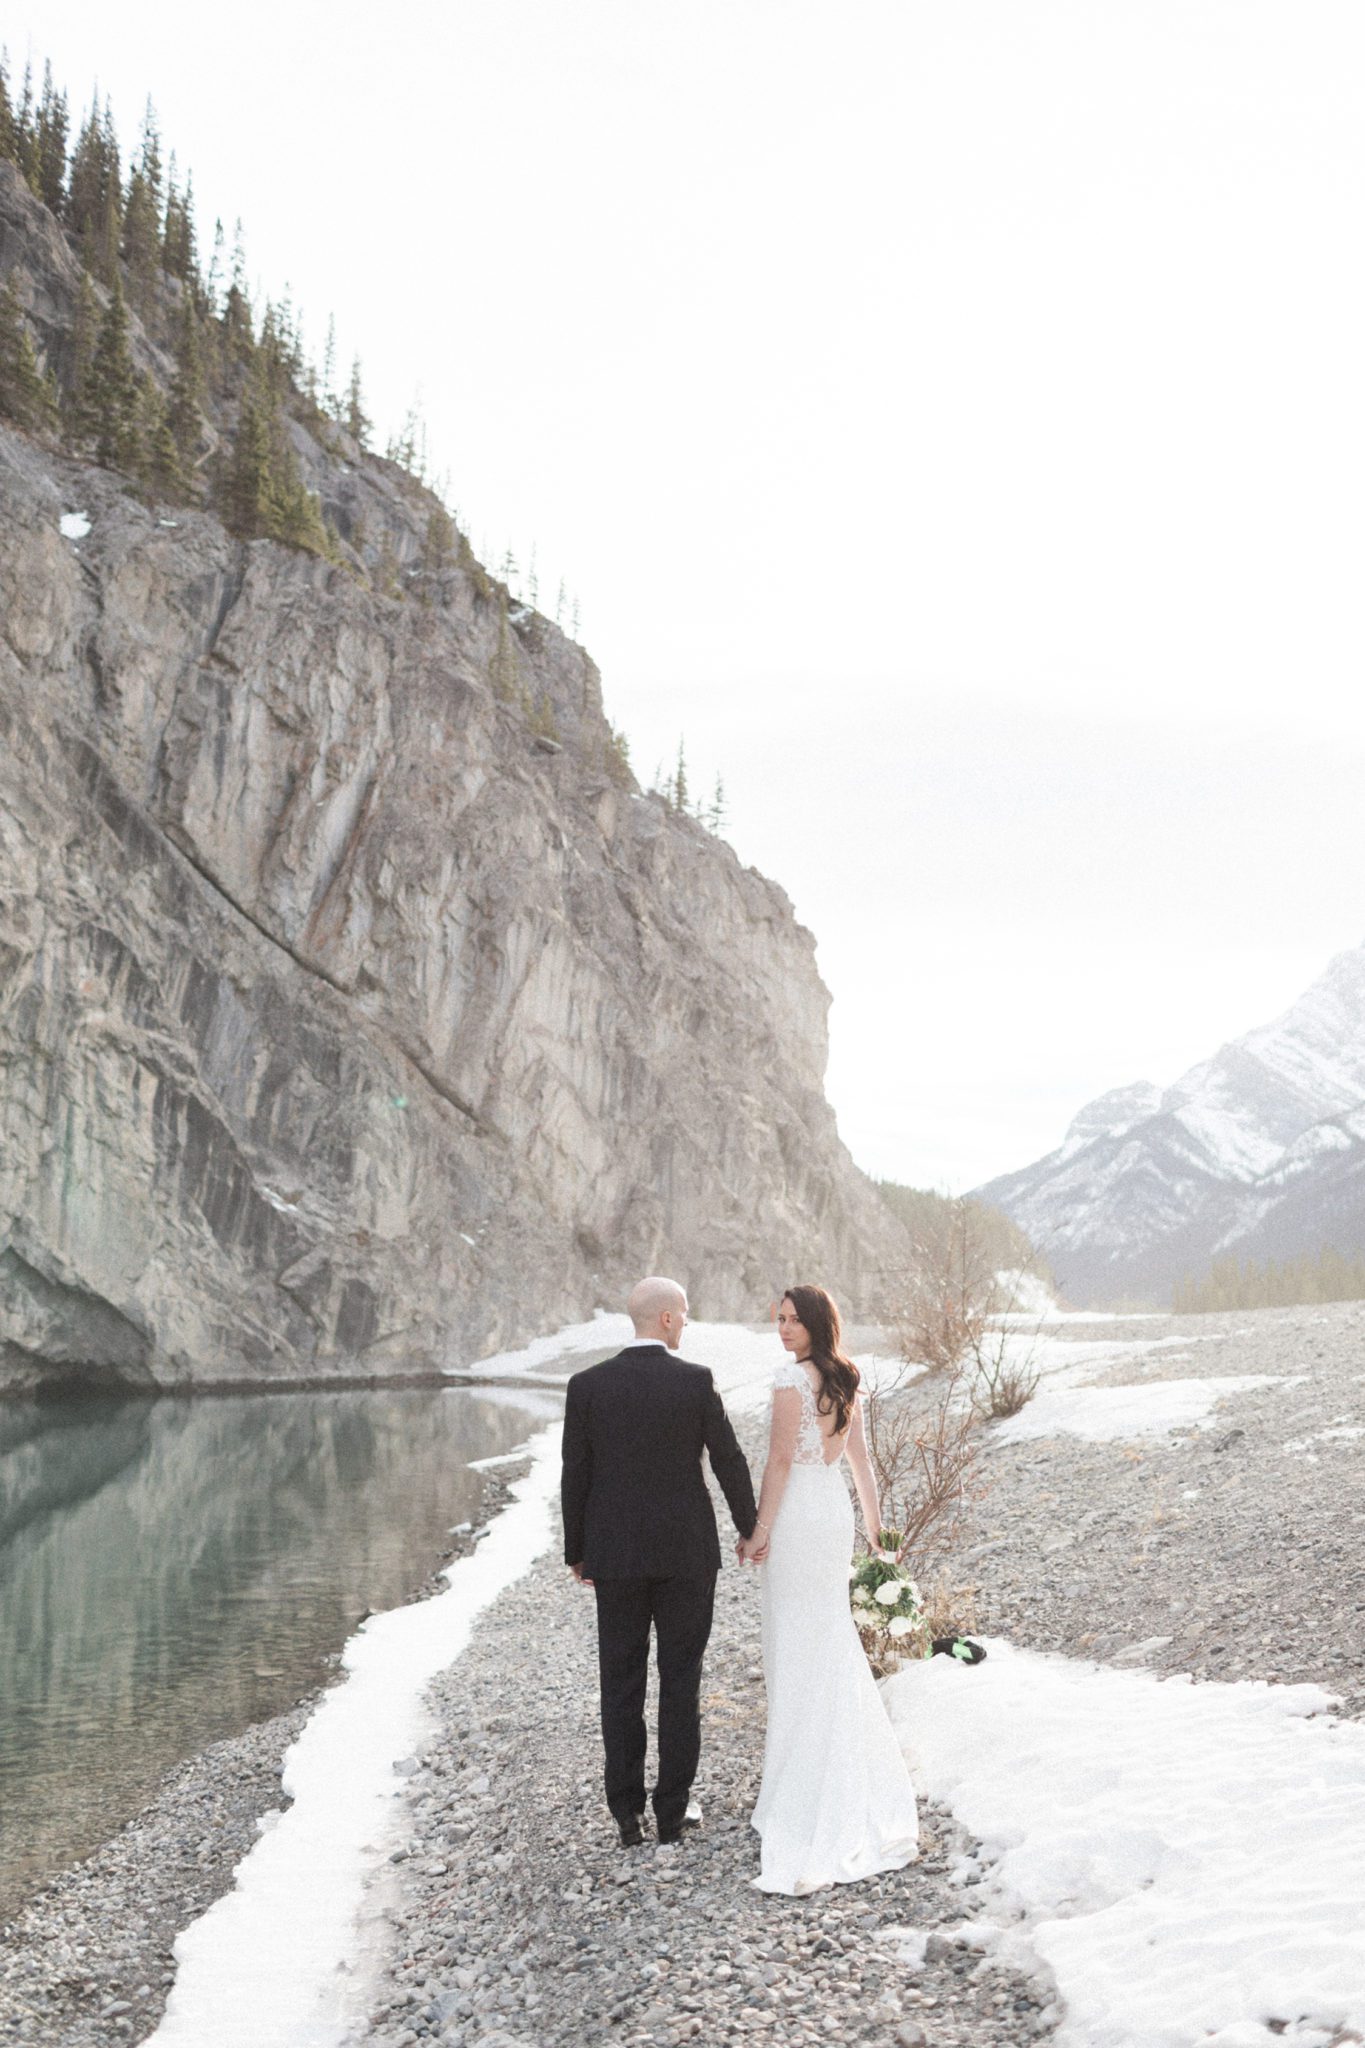 This Monochromatic Calgary Minimony Ends With Sunset Portraits in the Mountains Featured by Brontë Bride